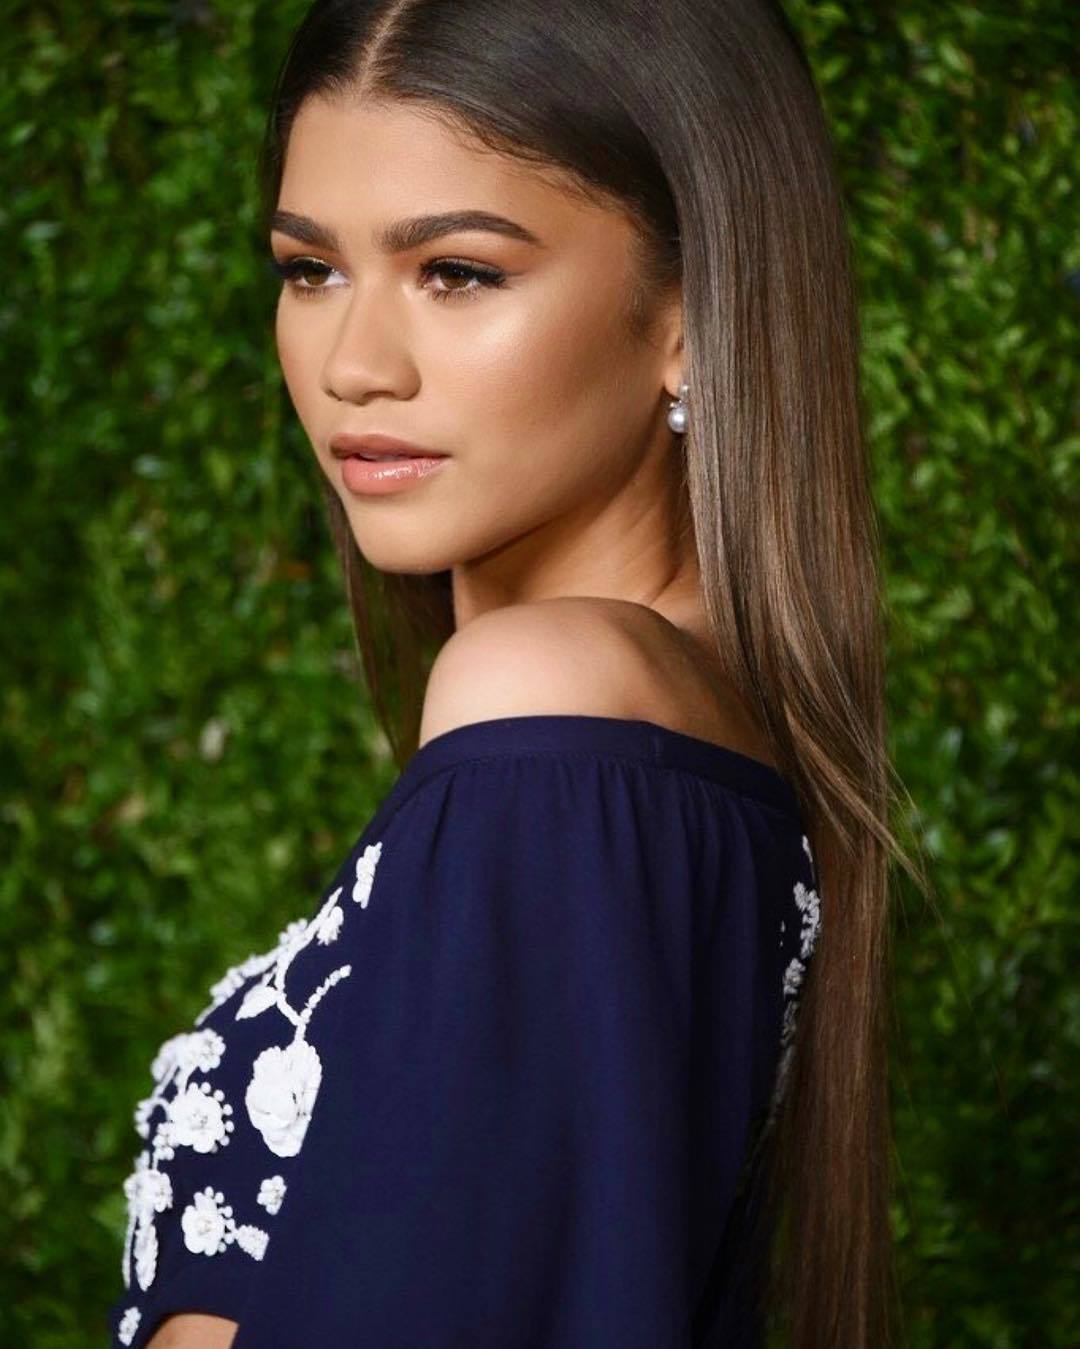 zendaya discovered her clothing line's latest model in a misogynistic meme | read | i-D